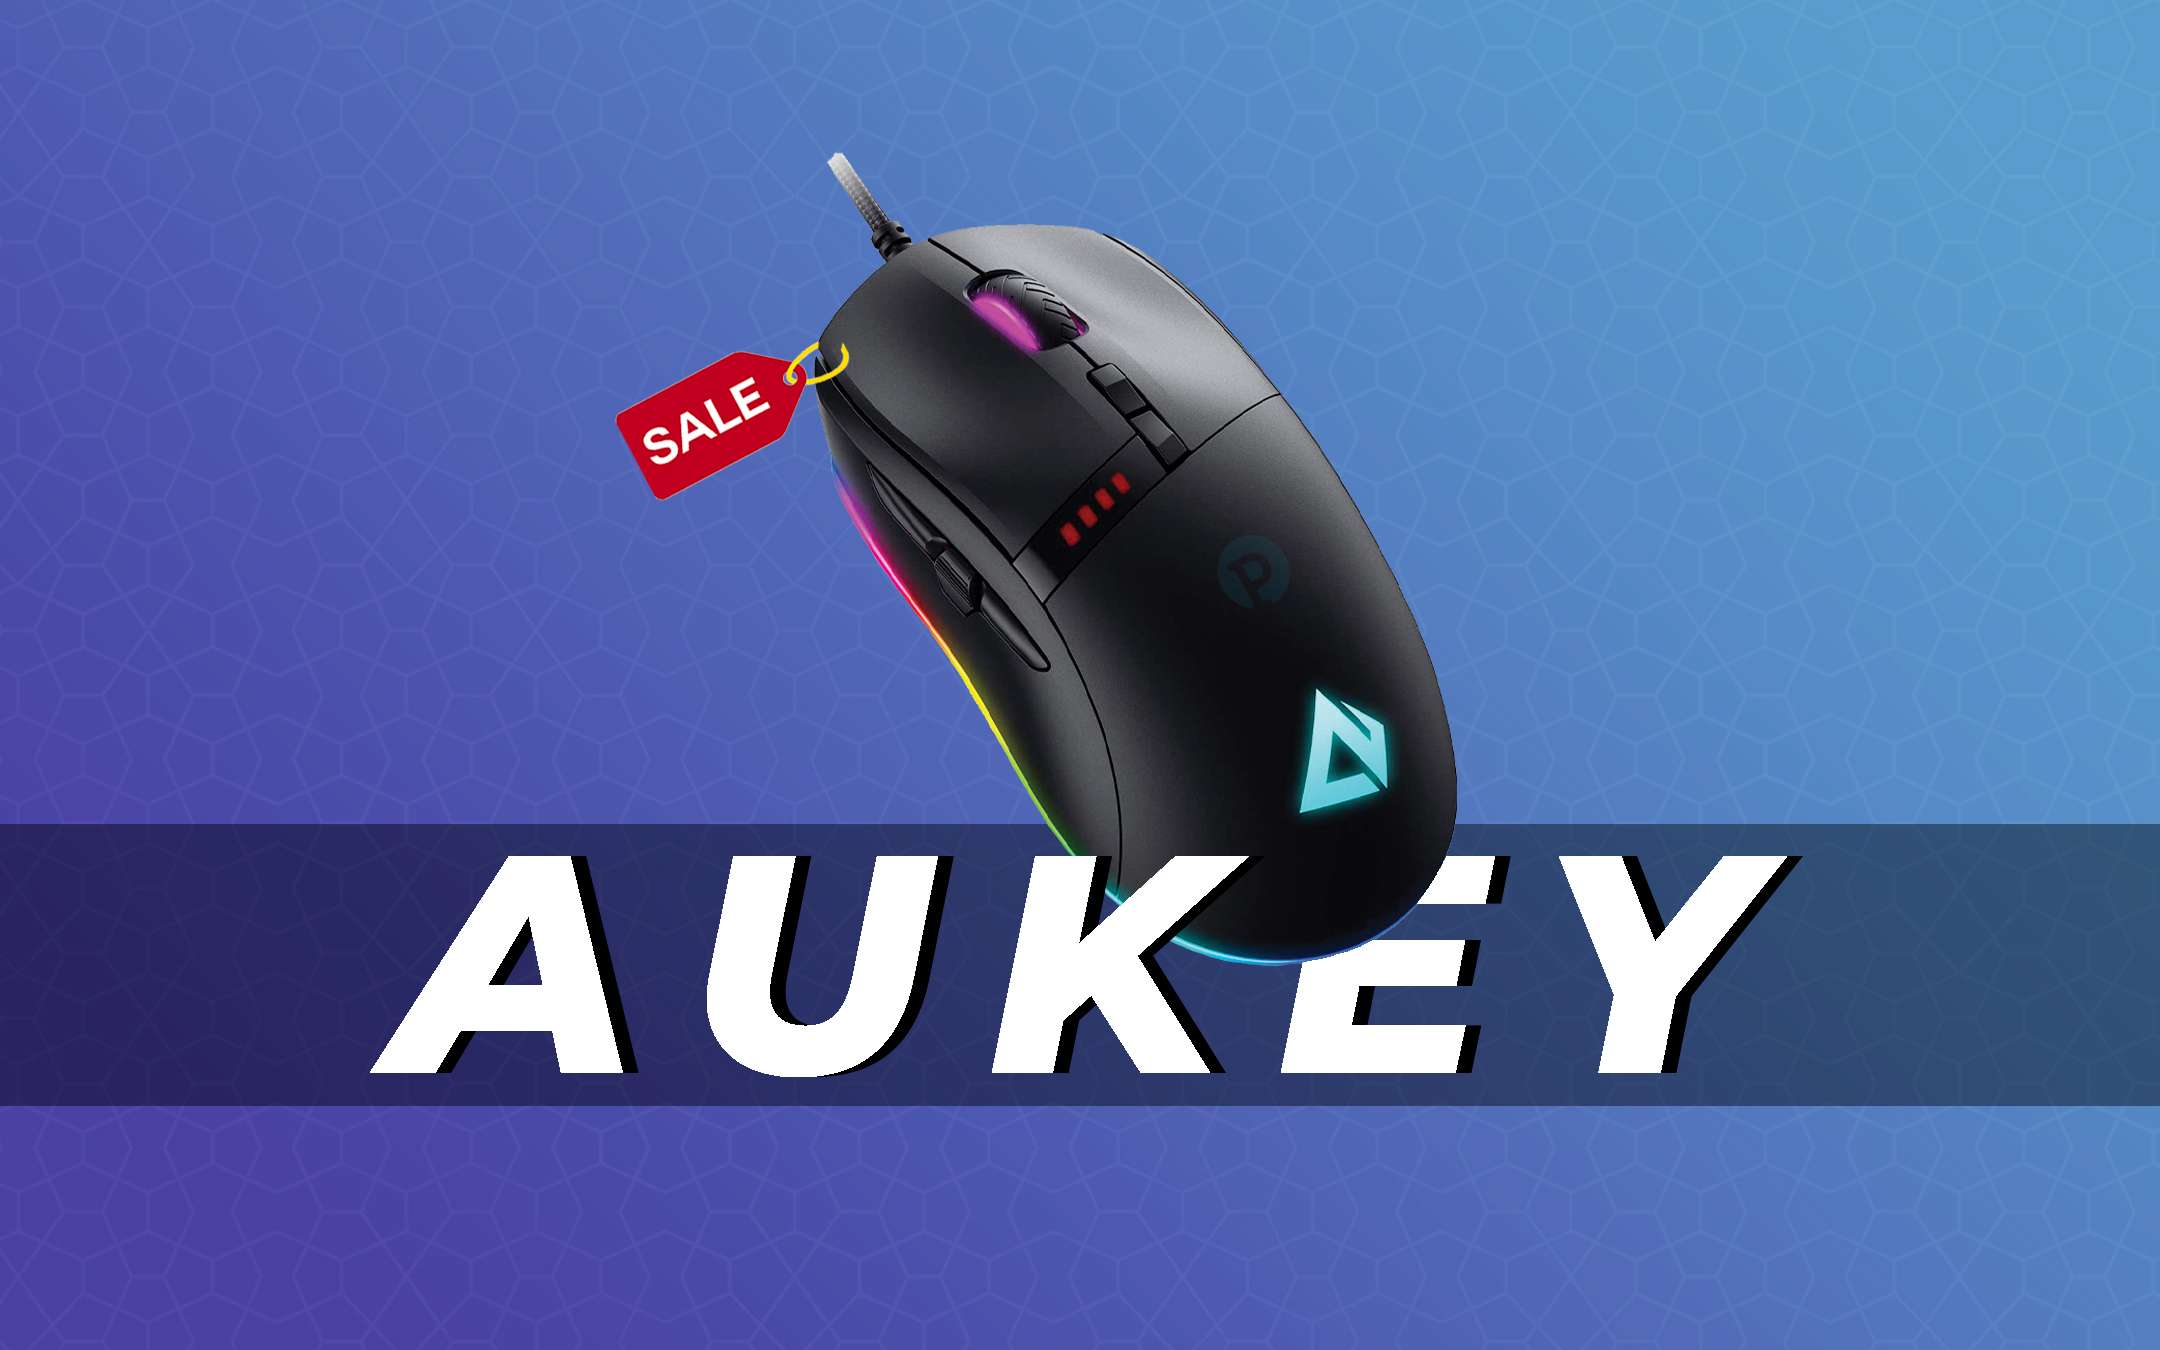 AUKEY Gaming Mouse on offer at a ridiculous price (-60%)